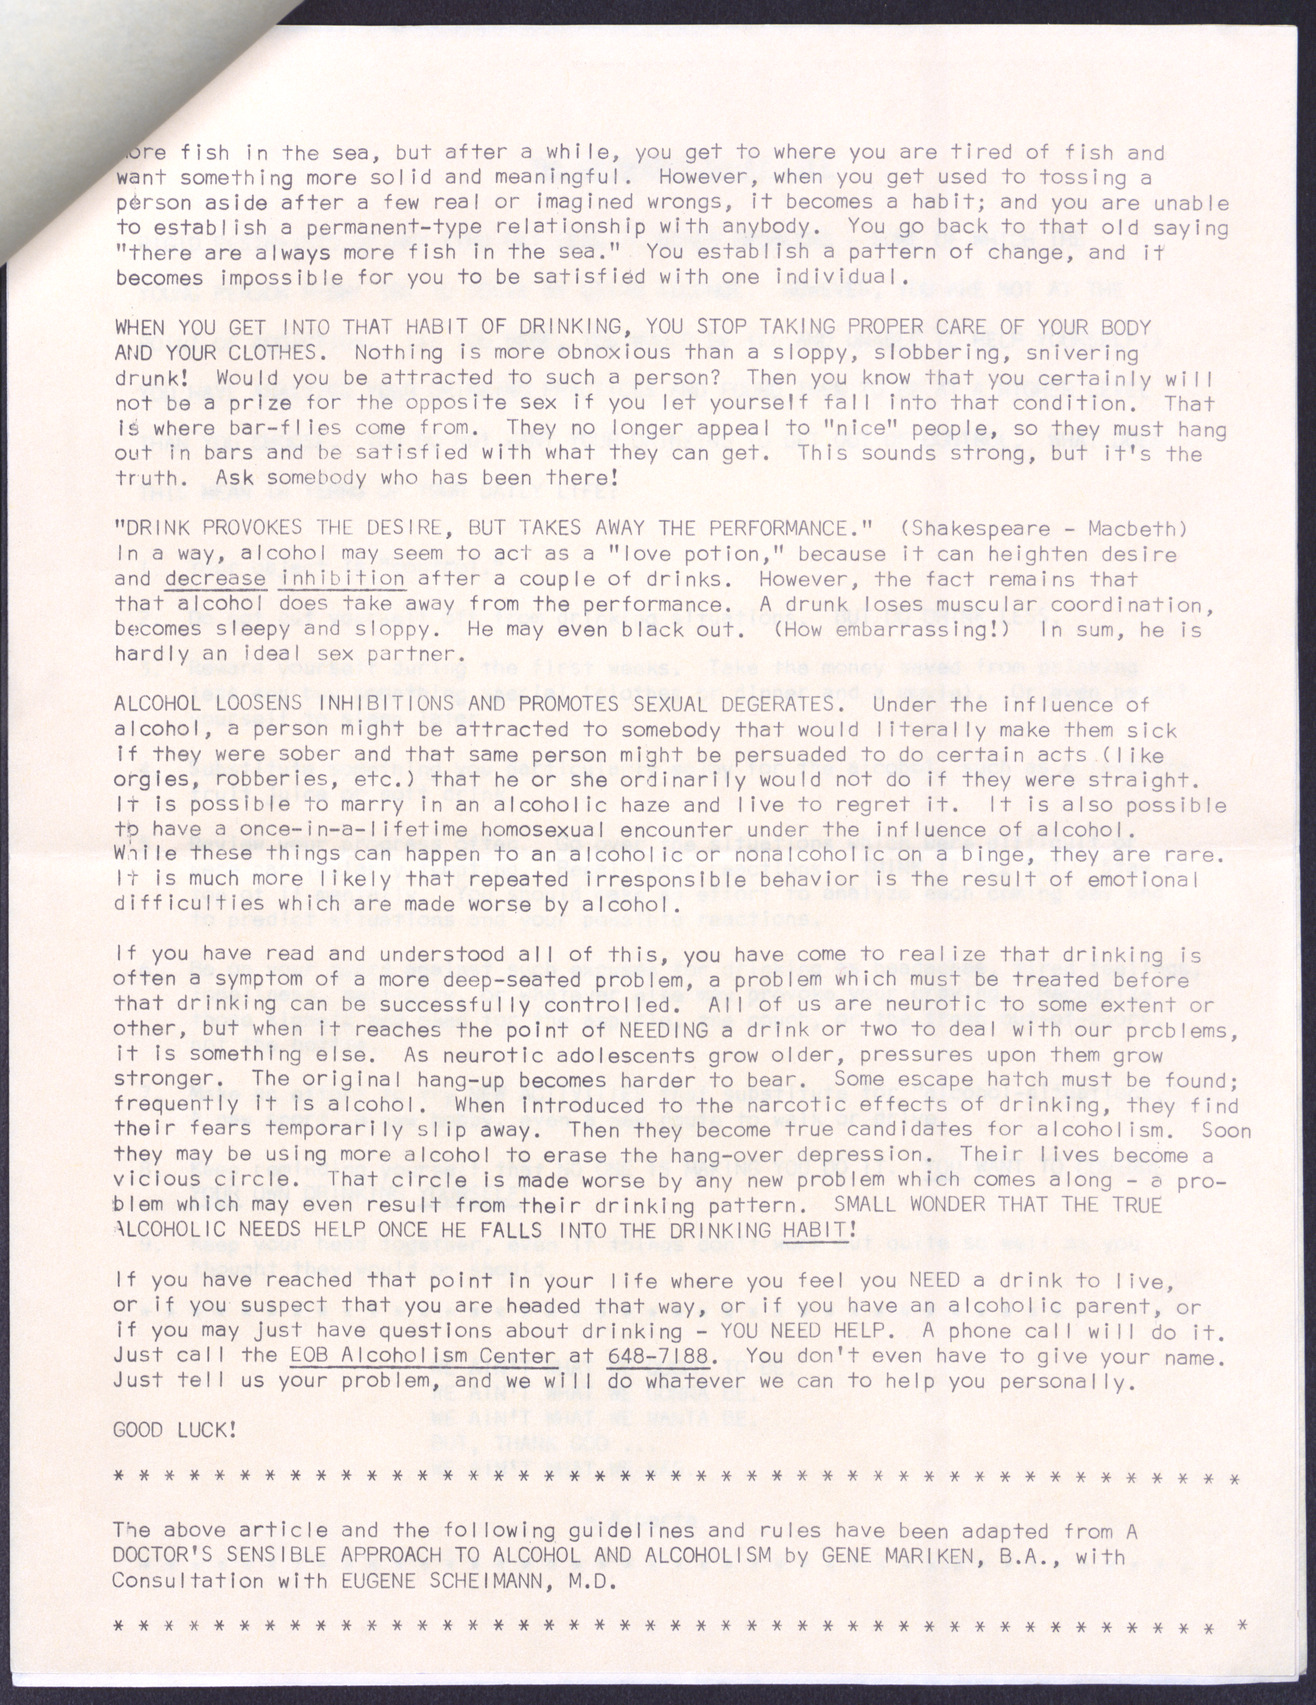 Article for the EOB Youth Program entitled "Sex and Booze" (4 pages), no date, page 2